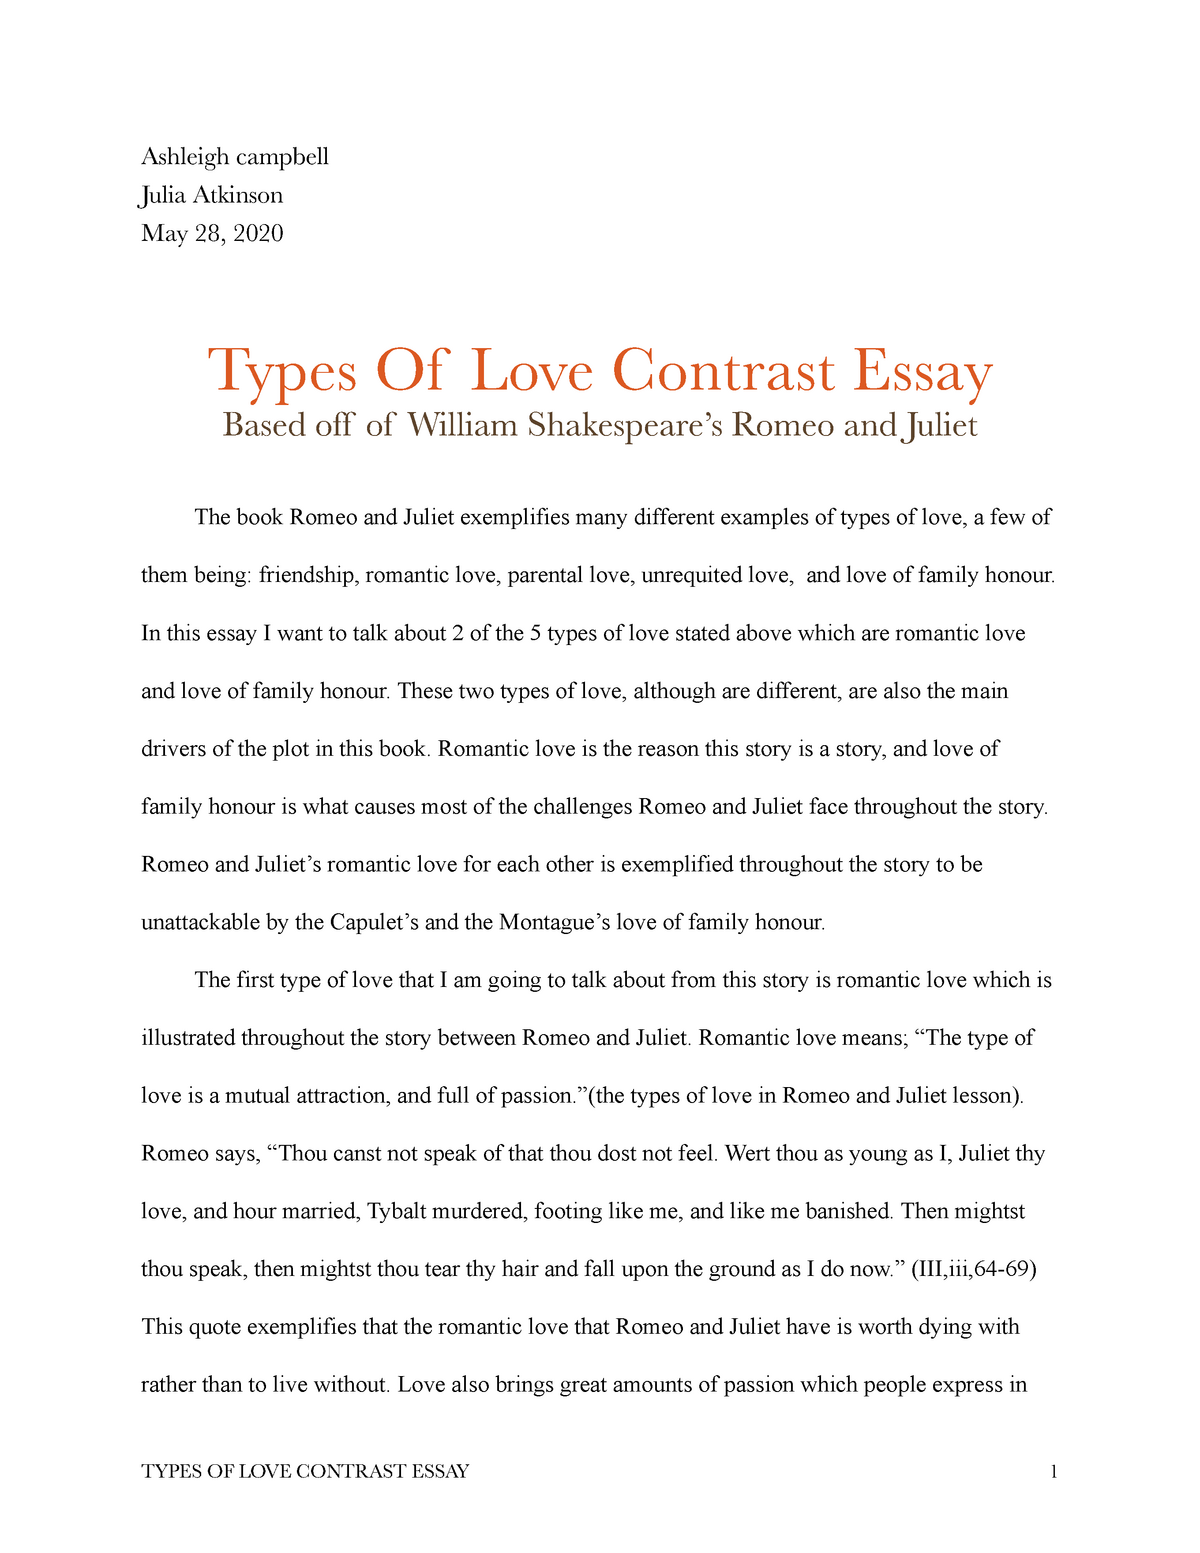 romeo and juliet types of love essay